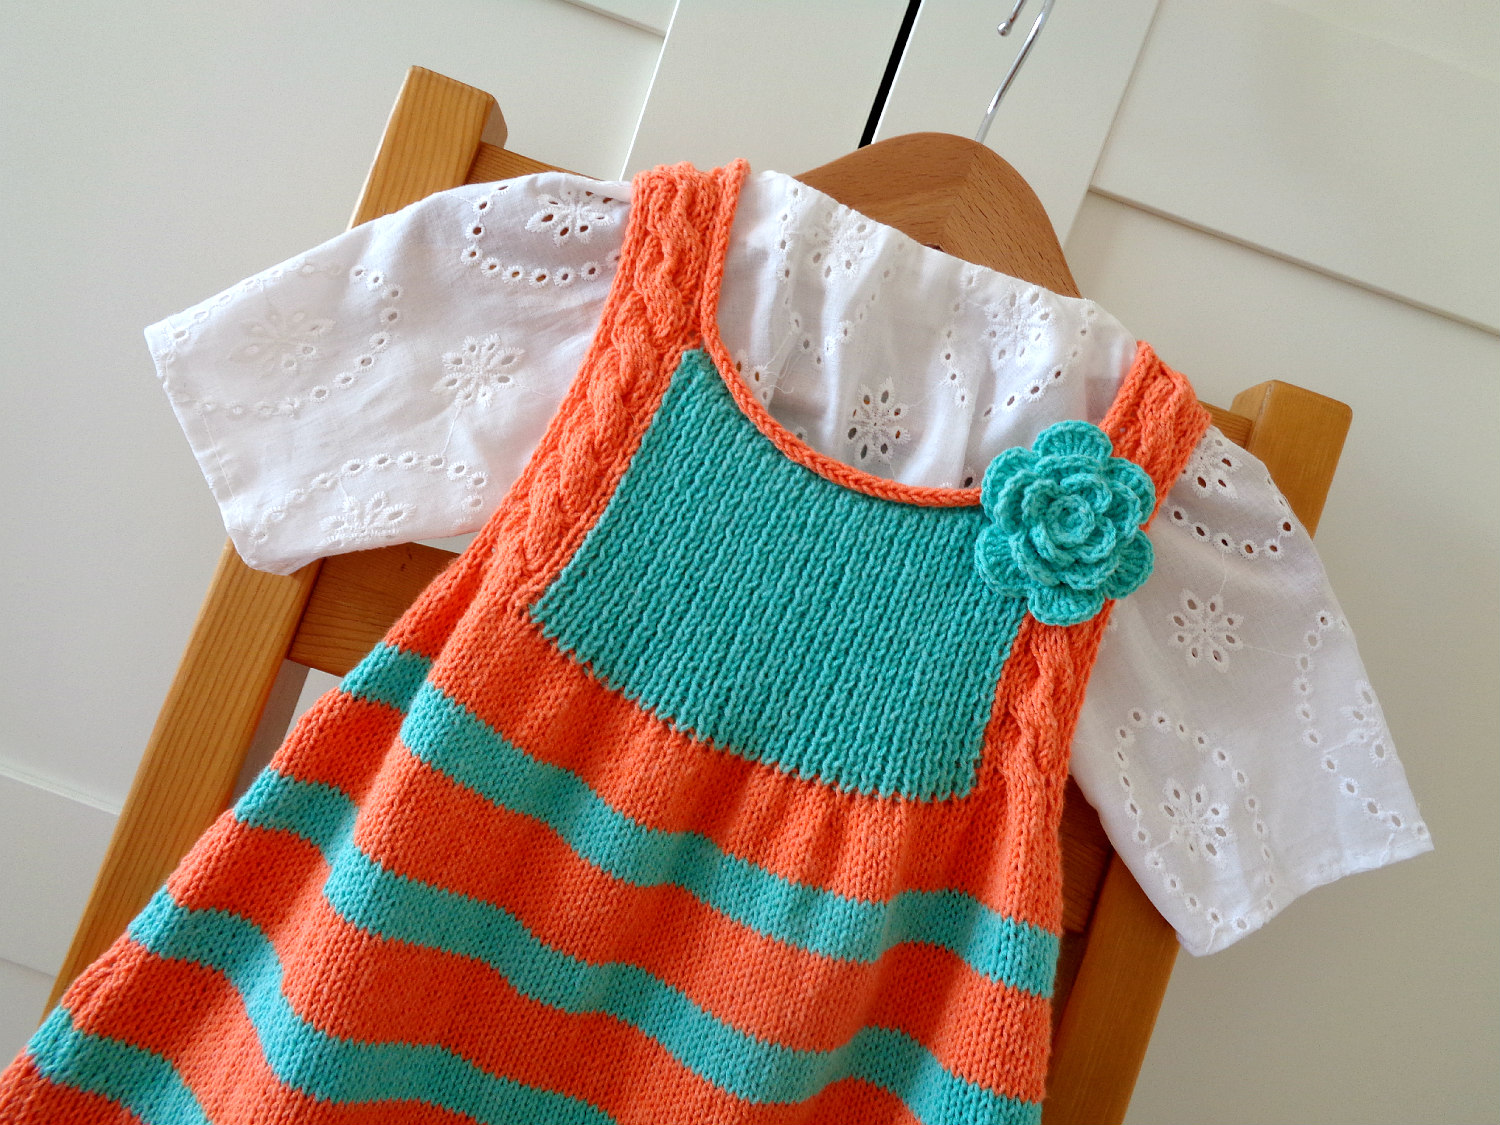 striped dress jumper baby toddler knitting pattern with crochet flower by Lilia Vanini / Liliacraftparty